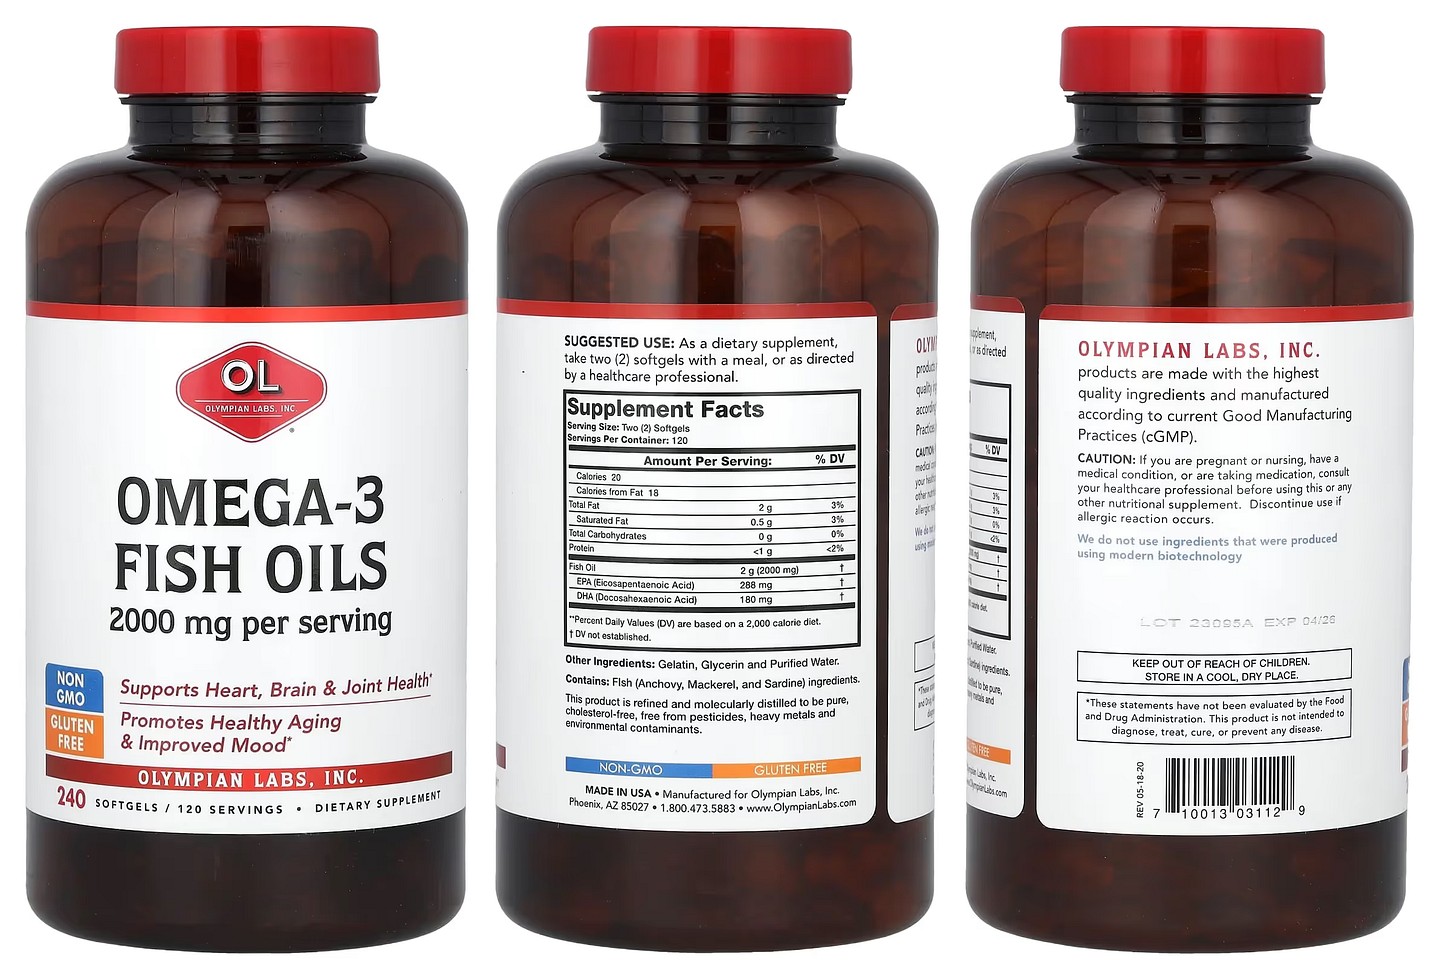 Olympian Labs, Omega-3 Fish Oils packaging